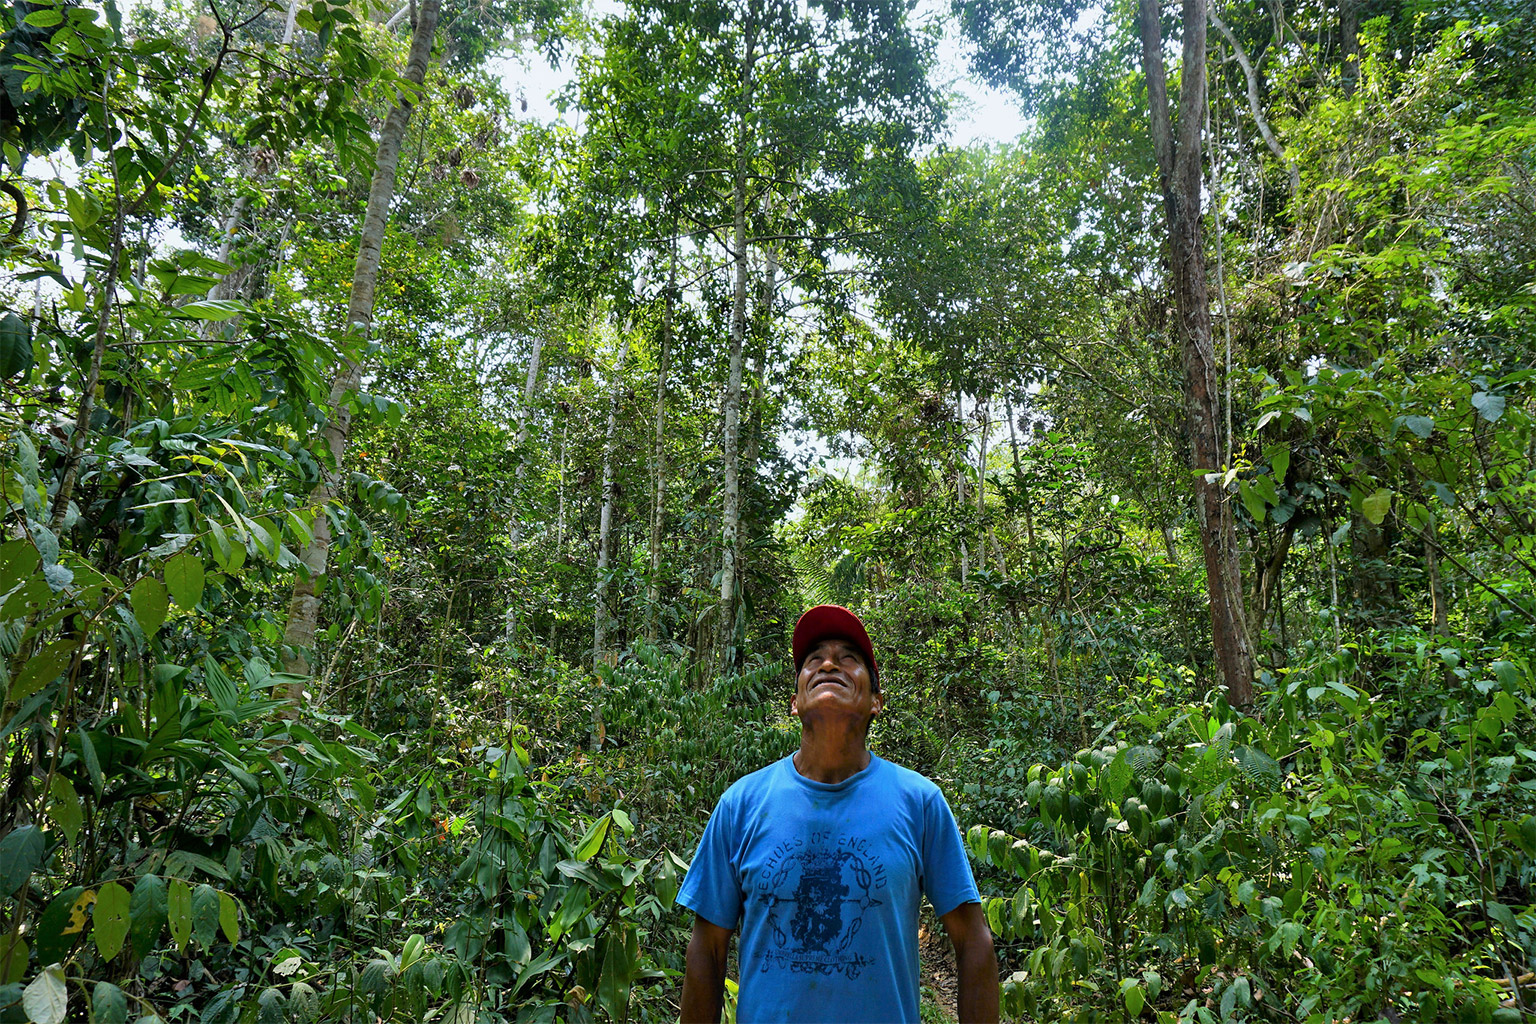 A Brazil nut producer in the Amazon rainforest.